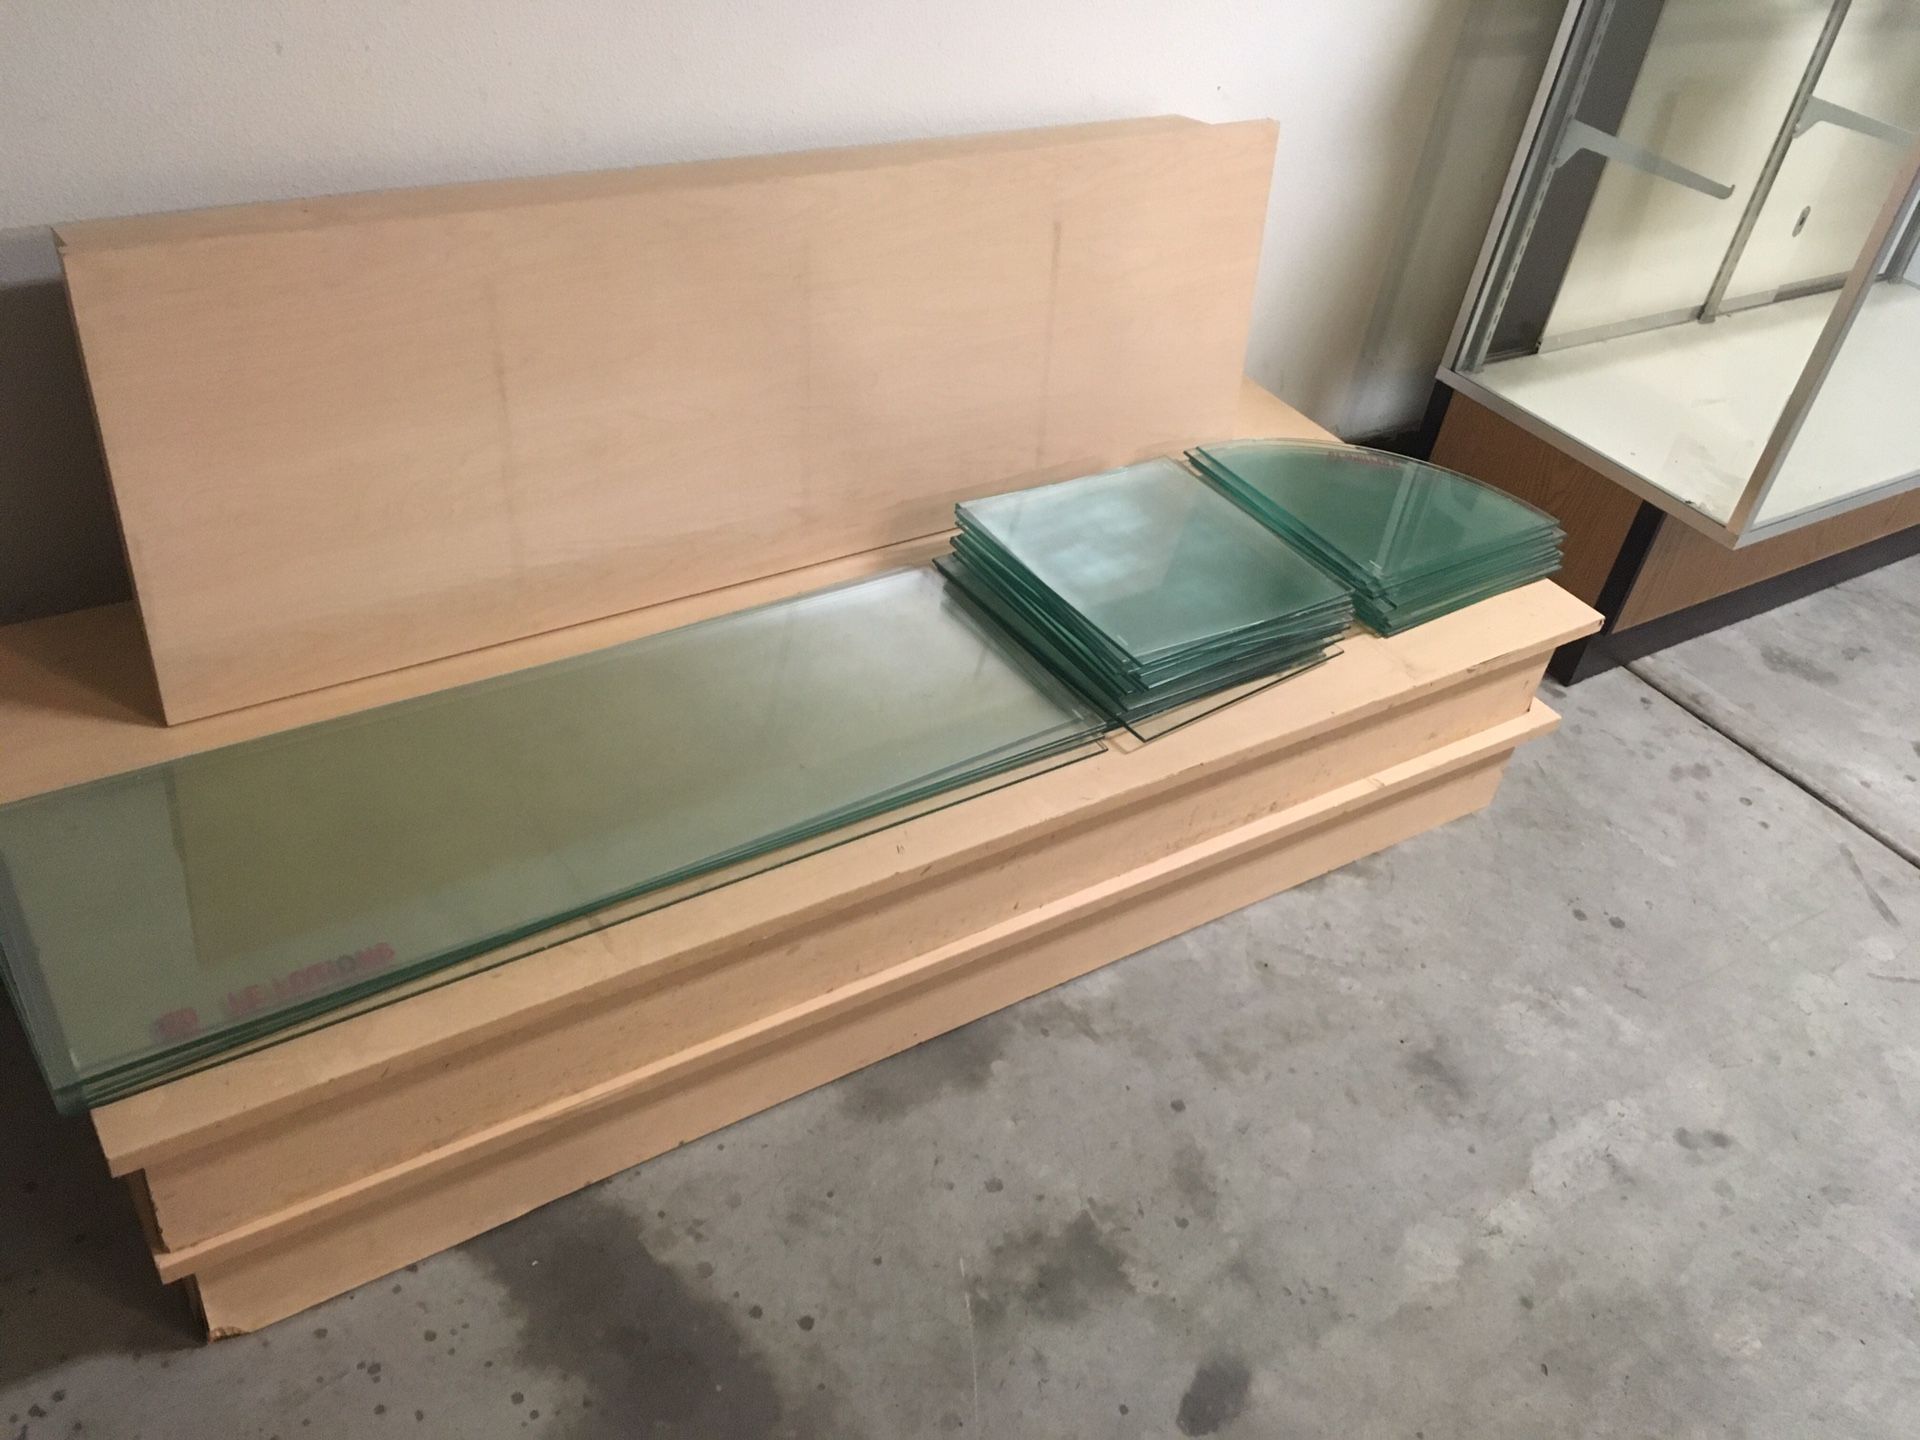 Display base boards with glass shelves